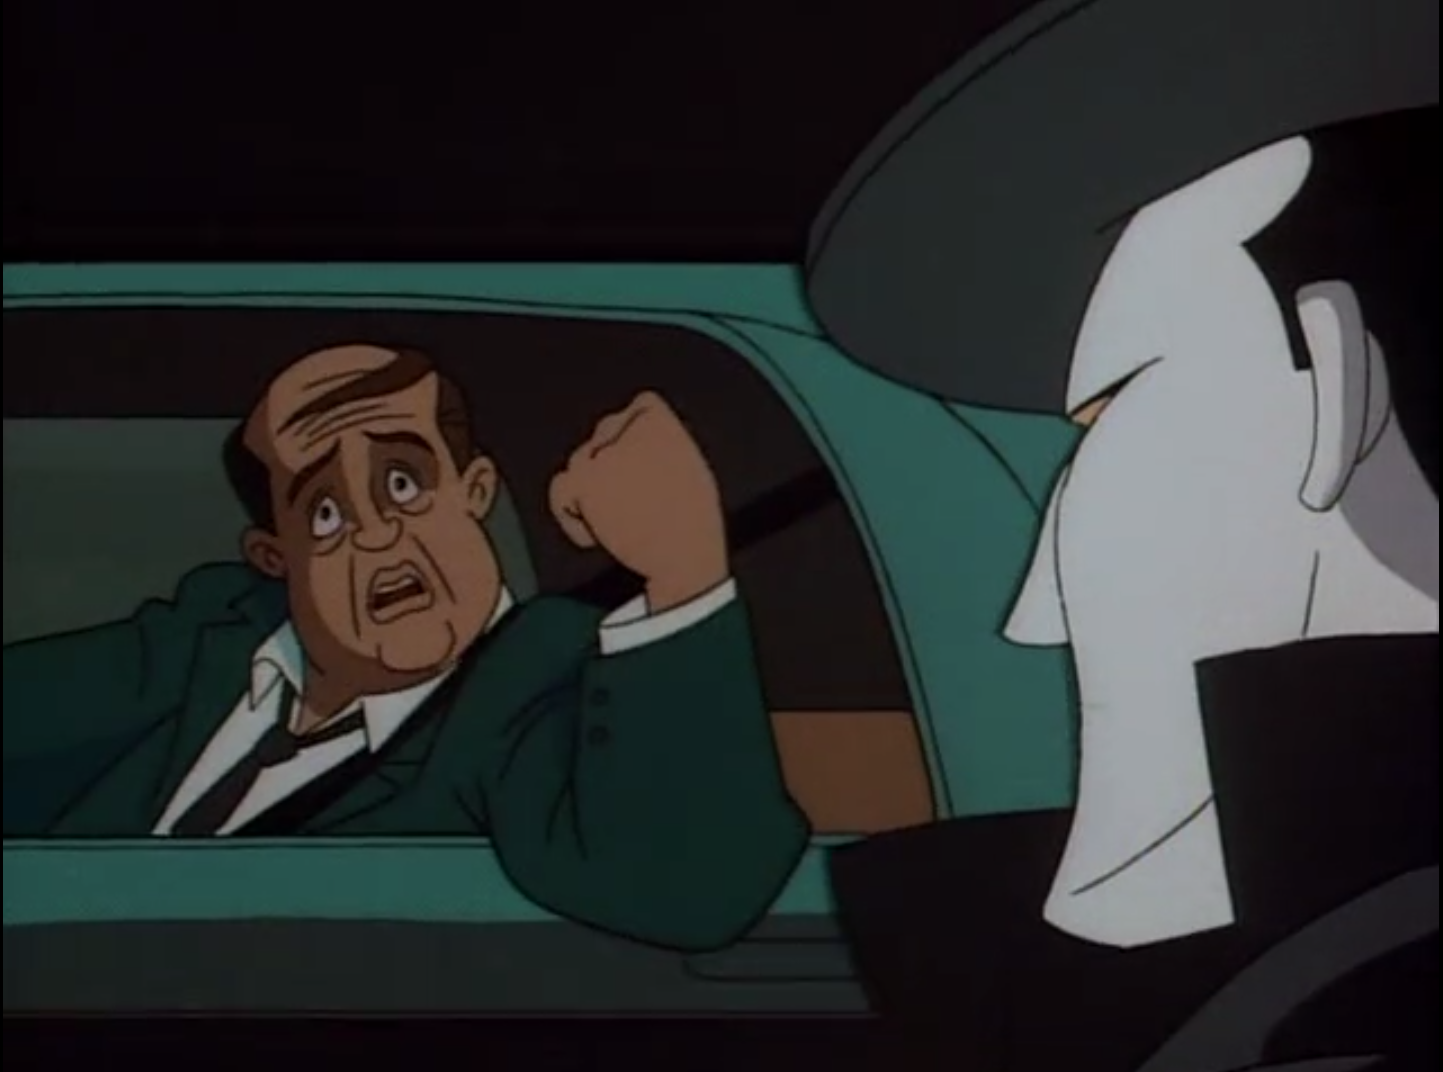 Charlie Collins in his car realizes that he has yelled at the Joker in the episode "Joker's Favor" from Batman: The Animated Series.